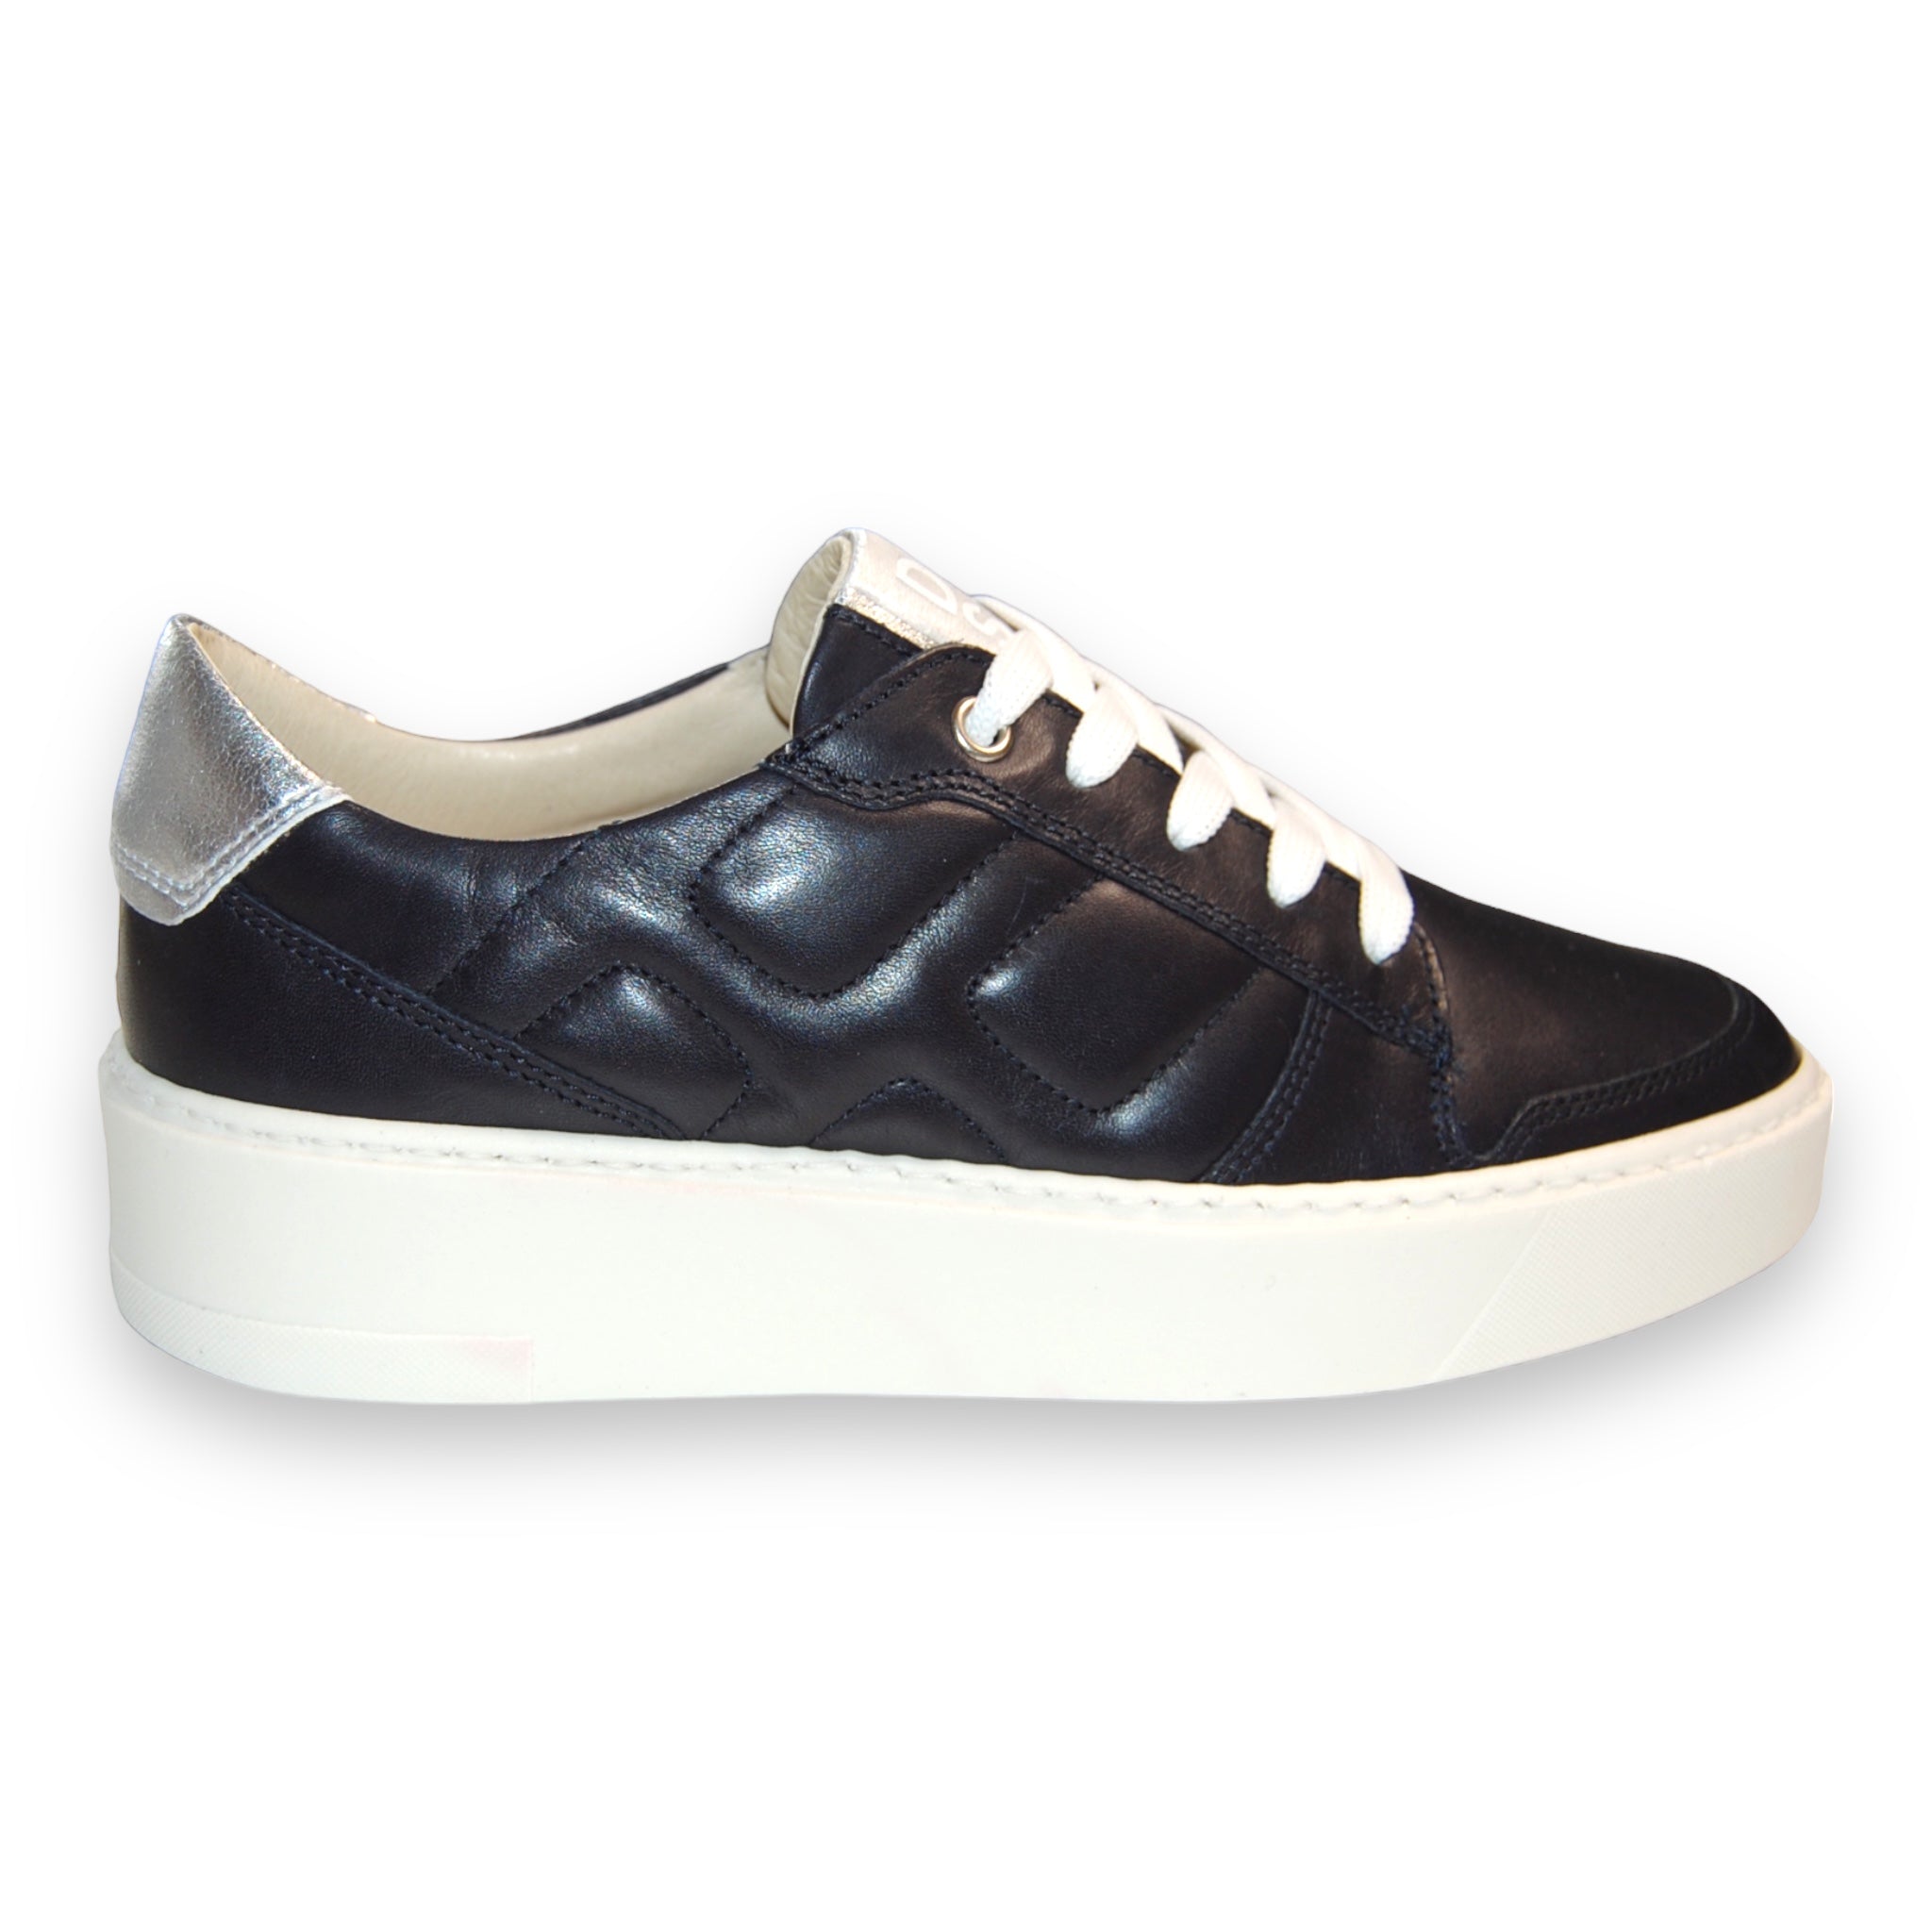 DL Sport Quilted Leather Sneaker Navy style 5608-side -view